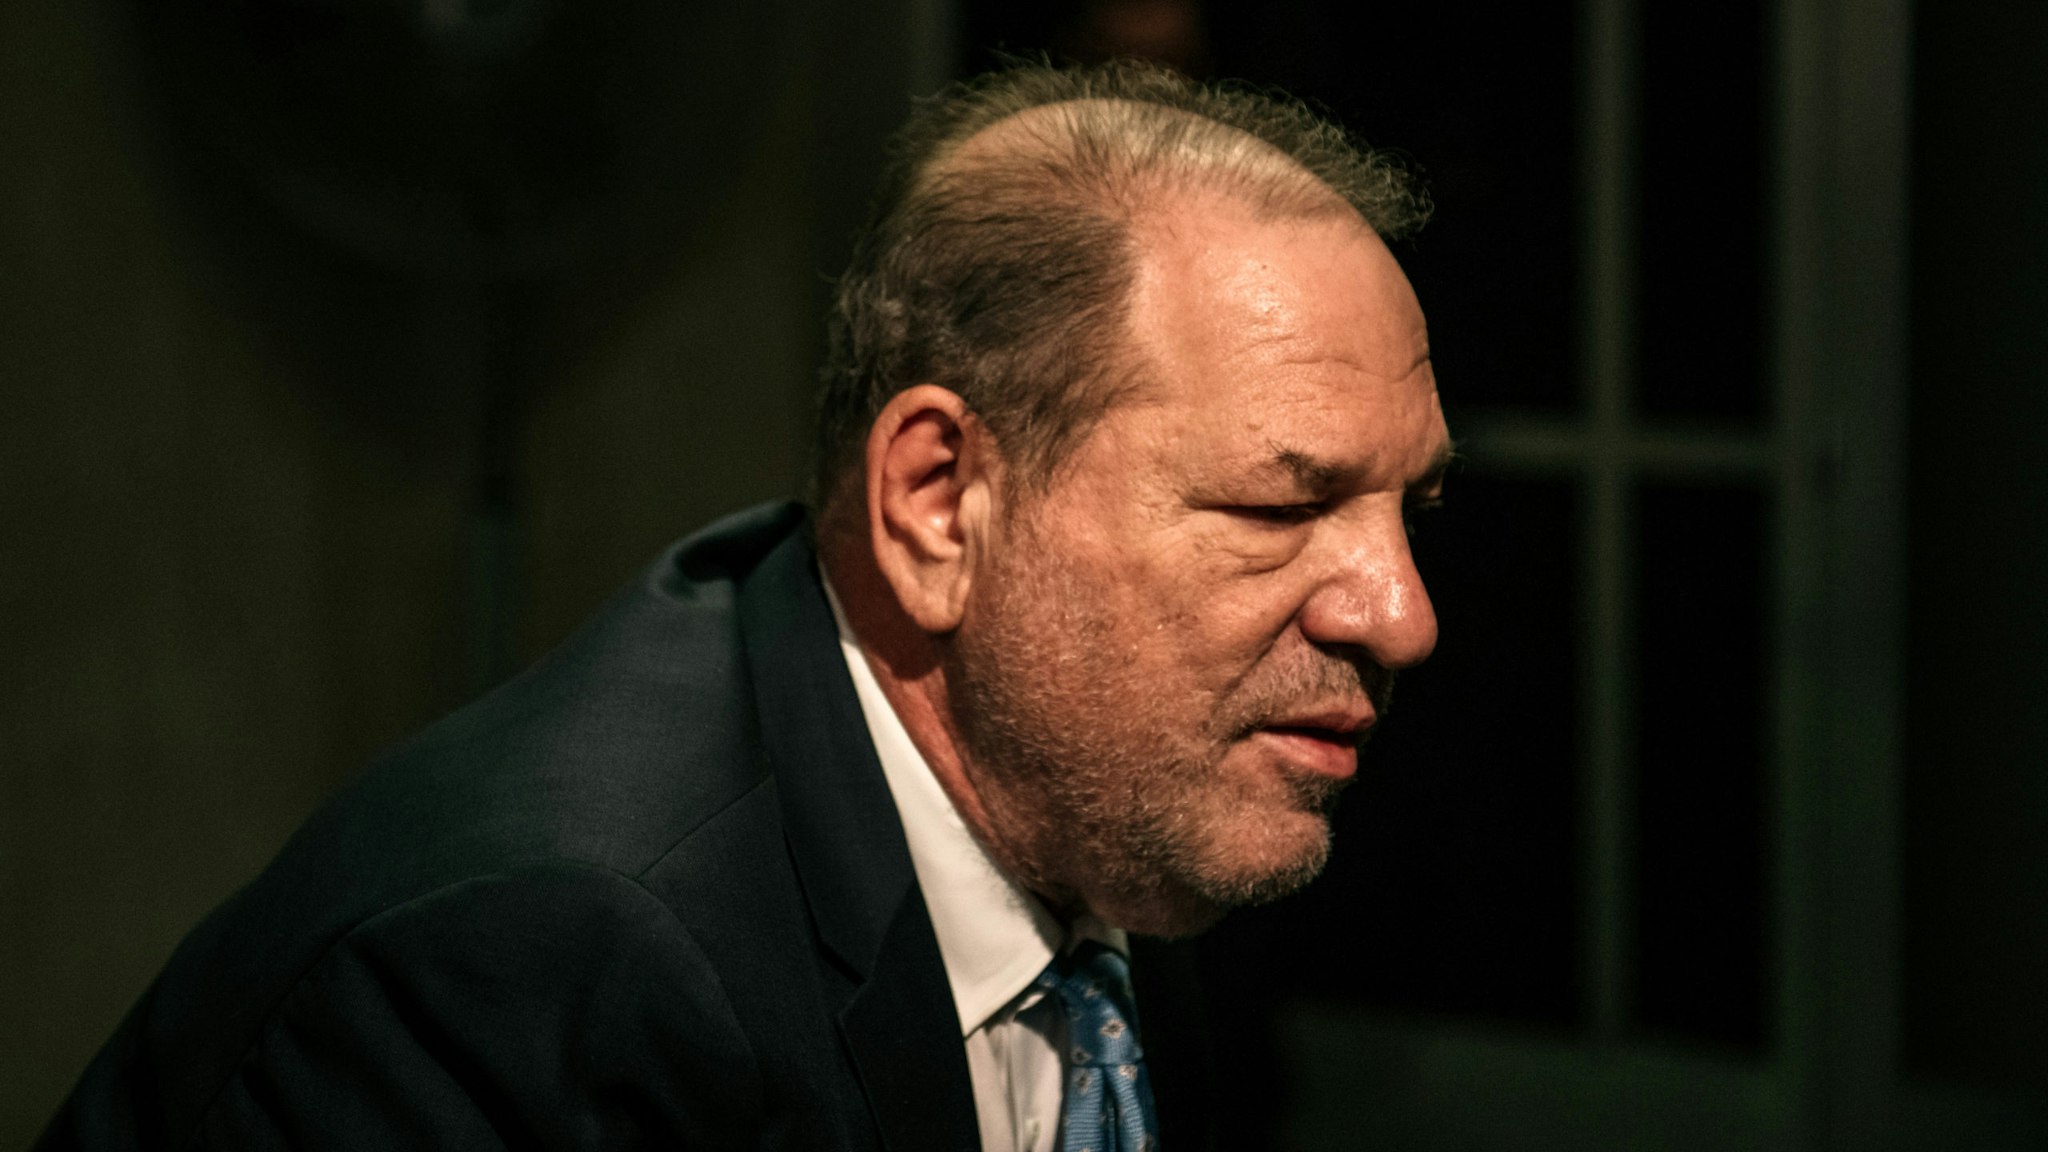 NEW YORK, NY - FEBRUARY 24: Movie producer Harvey Weinstein enters New York City Criminal Court on February 24, 2020 in New York City. Jury deliberations in the high-profile trial are believed to be nearing a close, with a verdict on Weinstein's numerous rape and sexual misconduct charges expected in the coming days. (Photo by Scott Heins/Getty Images)